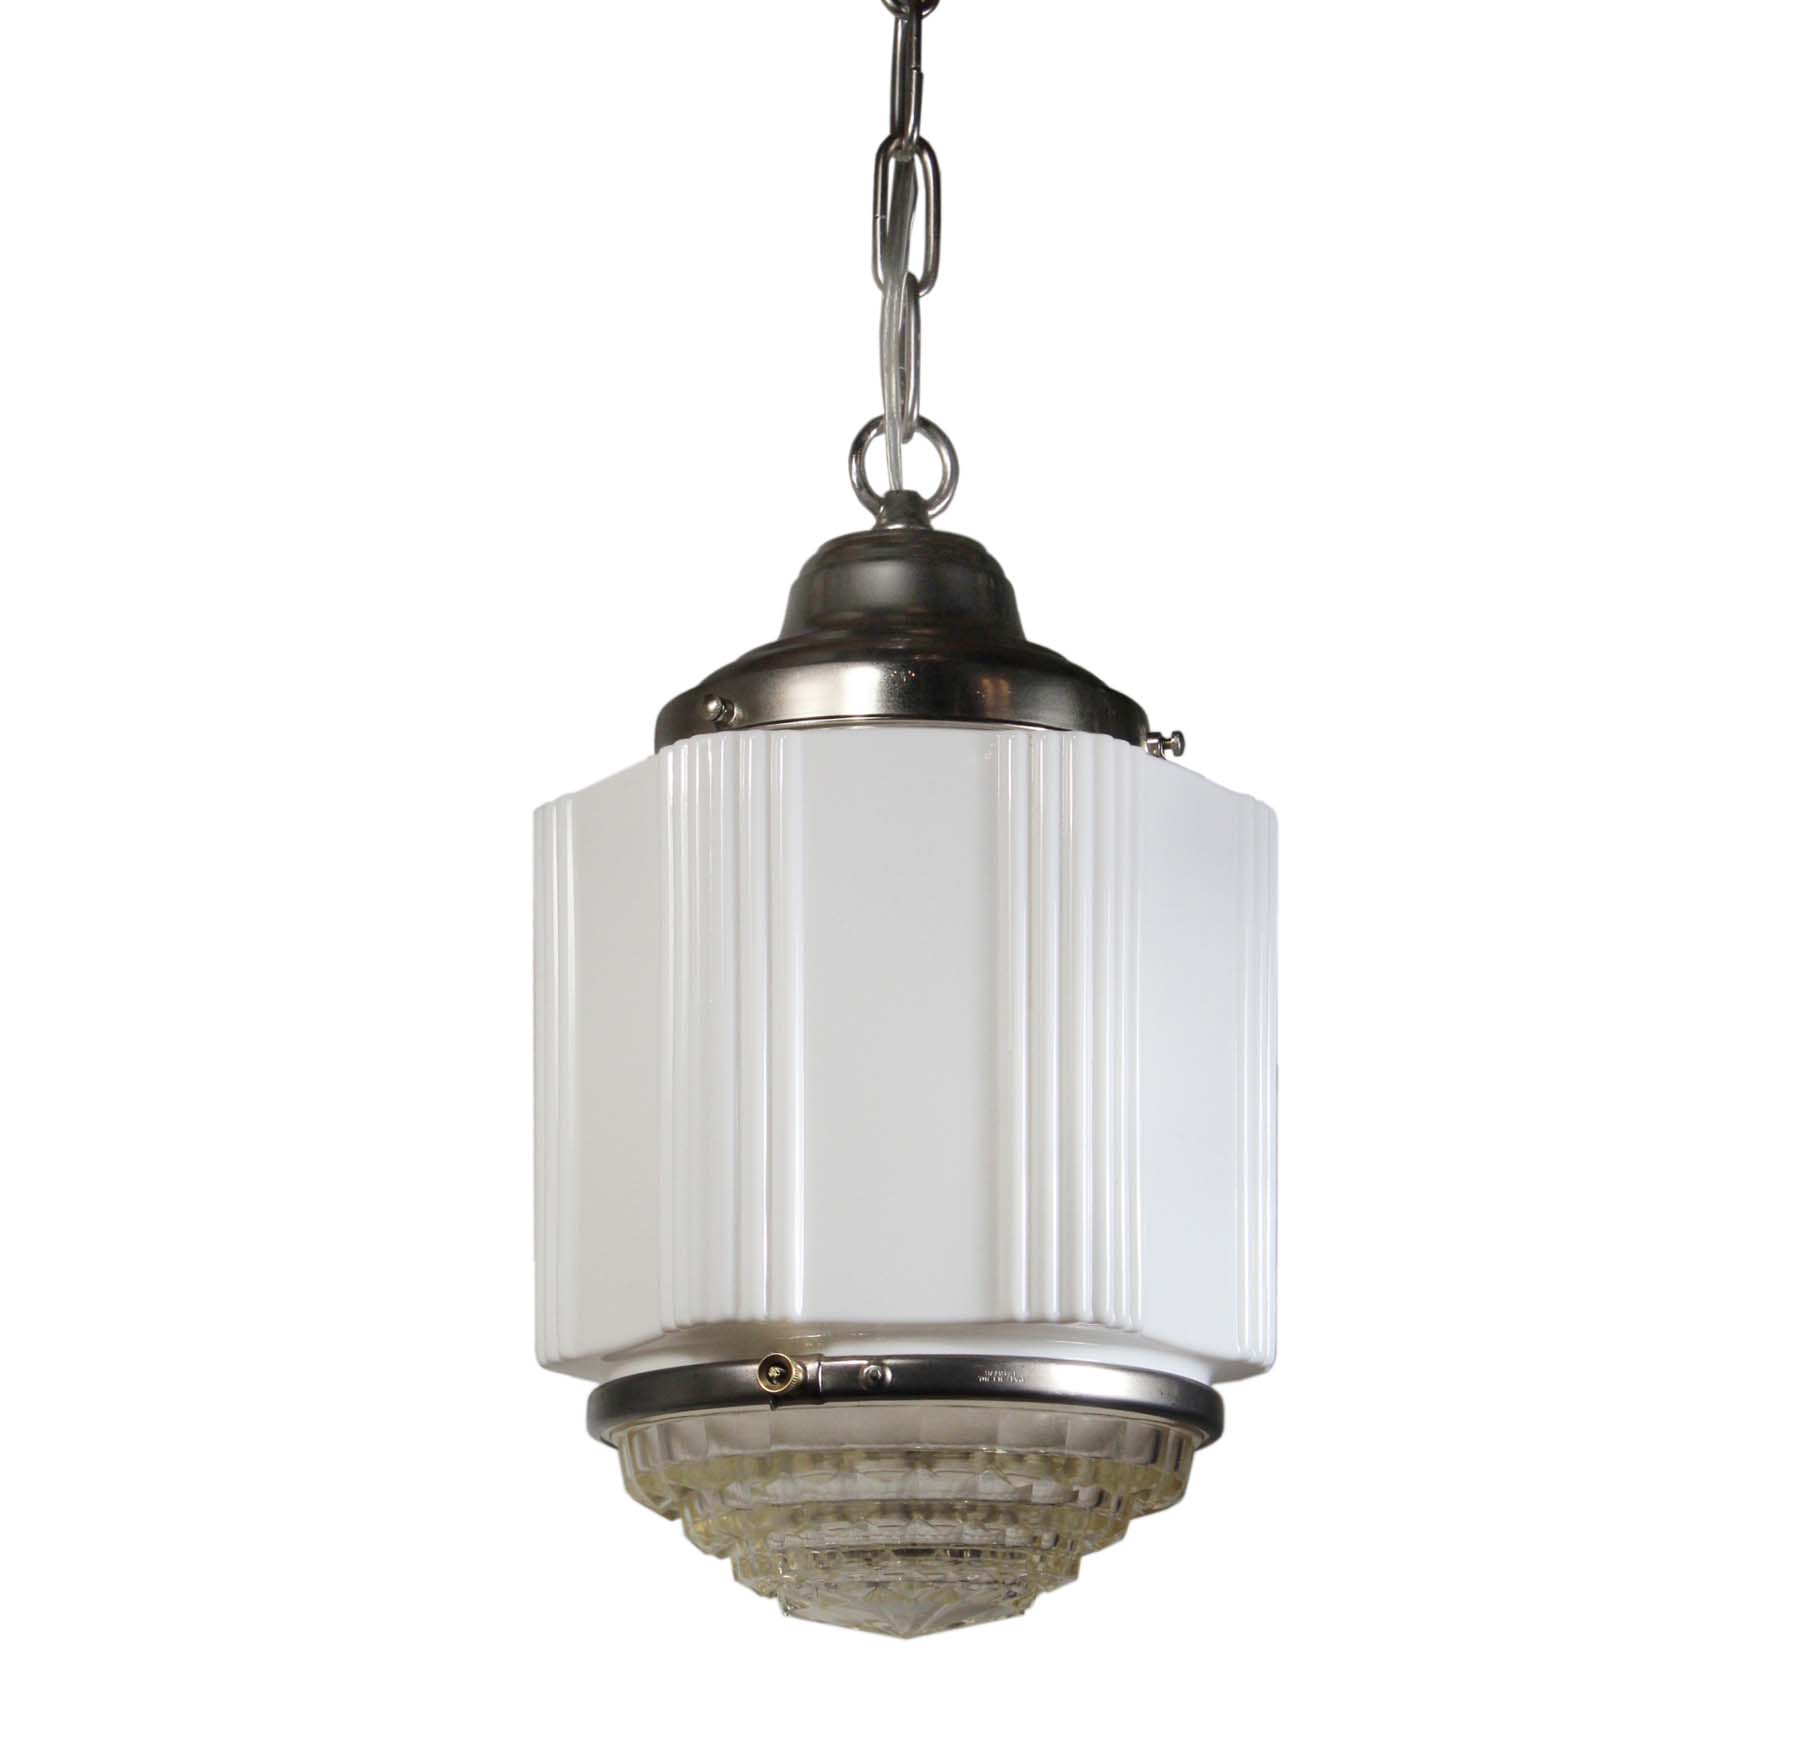 SOLD Matching Art Deco Skyscraper Pendant Lights with Two-Part Prismatic Shade-68872